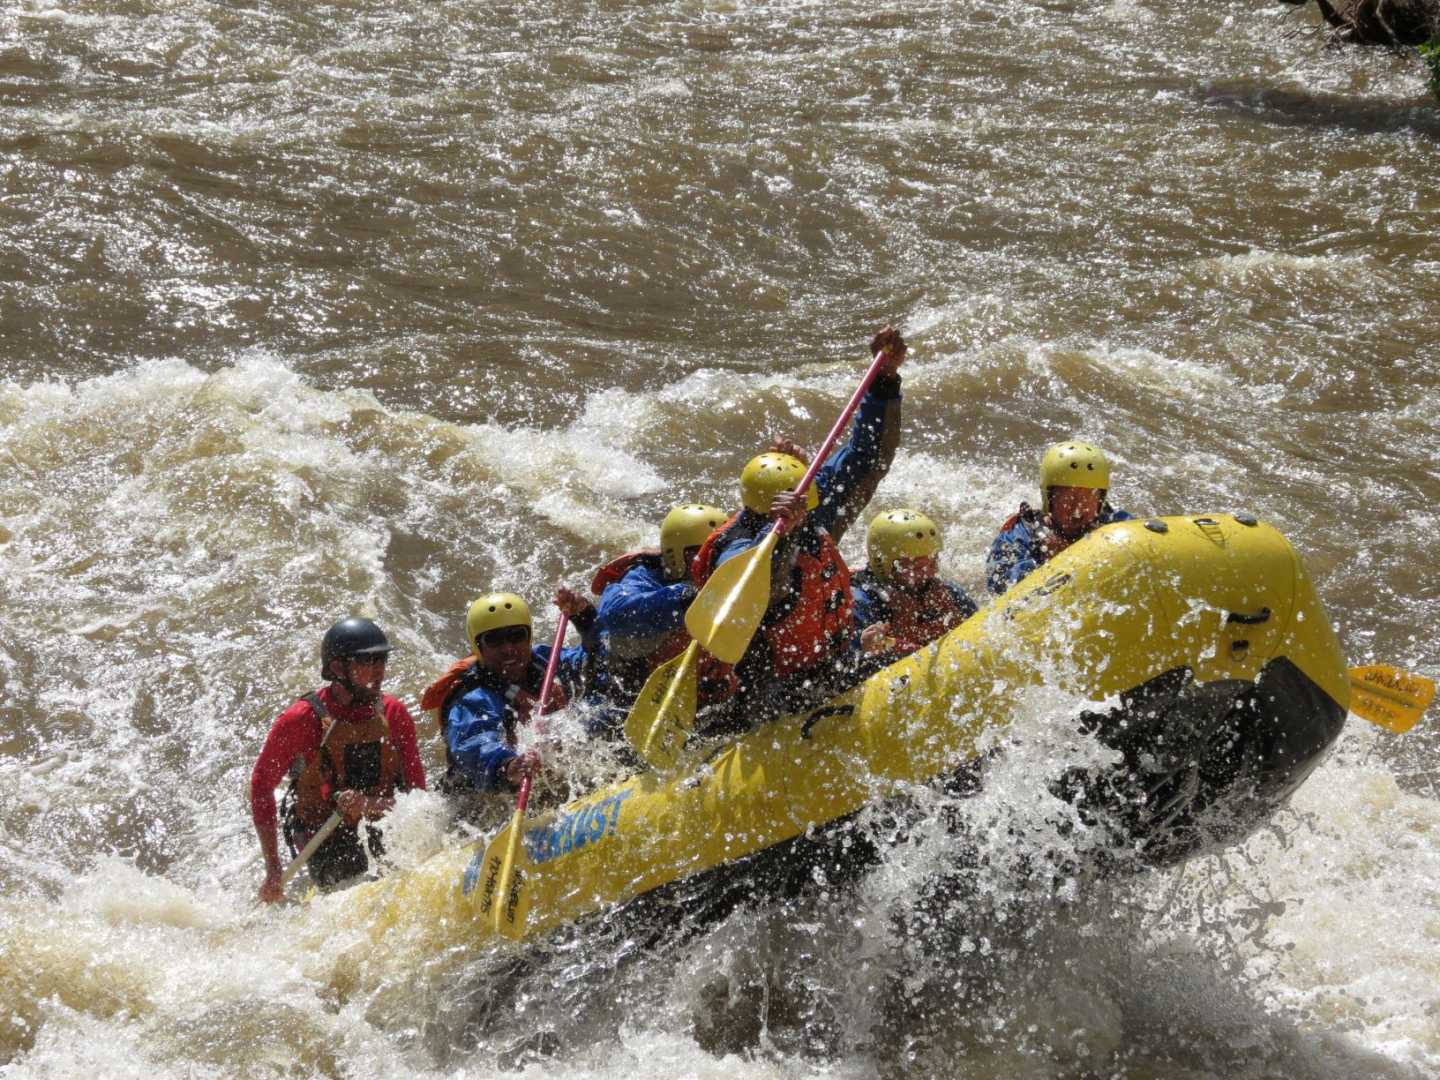 Closest whitewater rafting to Fort Collins